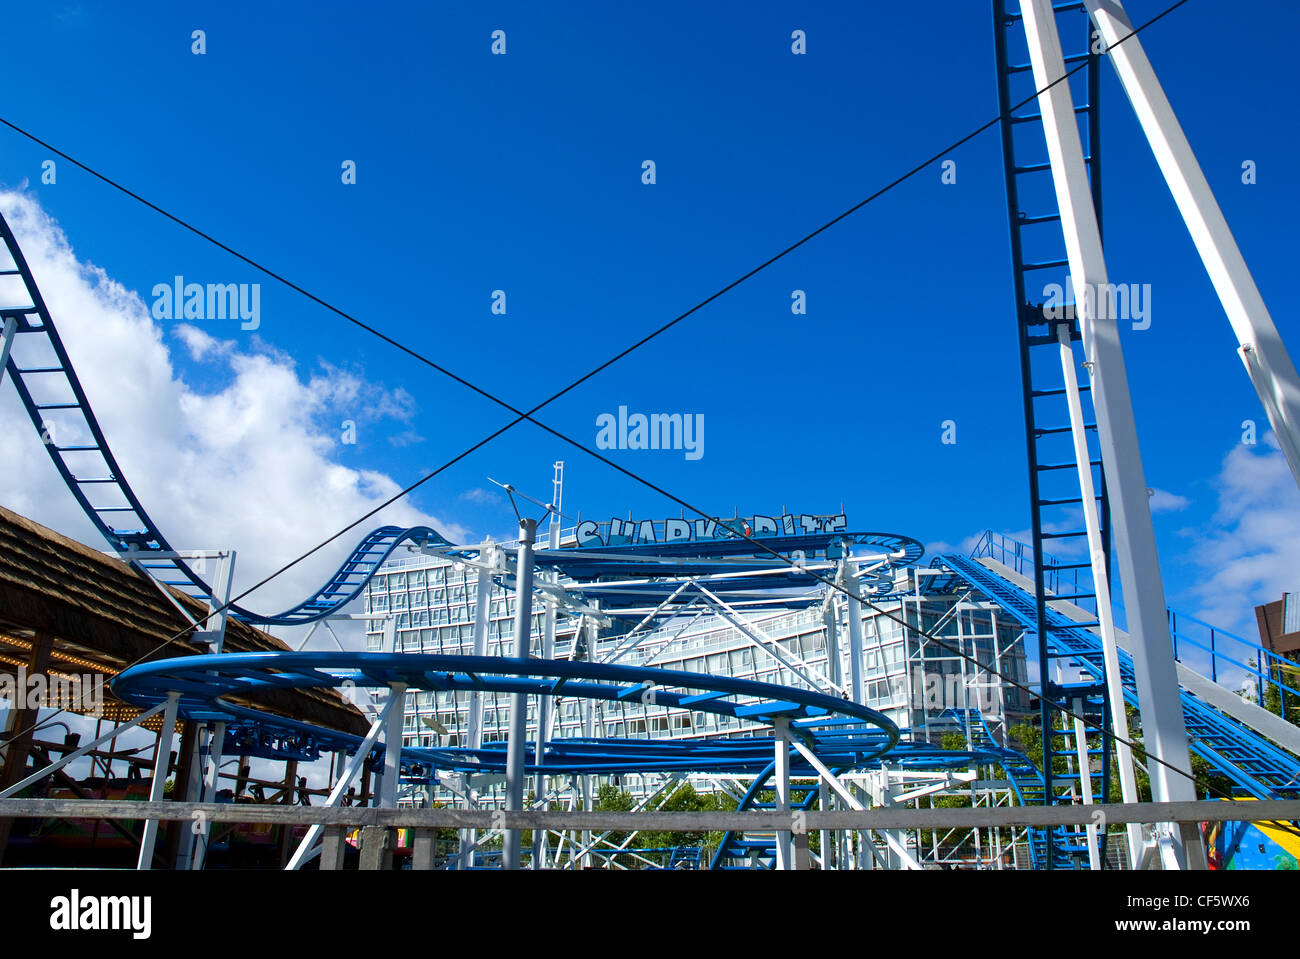 A roller coaster on the top level of Liverpool One, a huge new shopping and leisure development in the city. Stock Photo